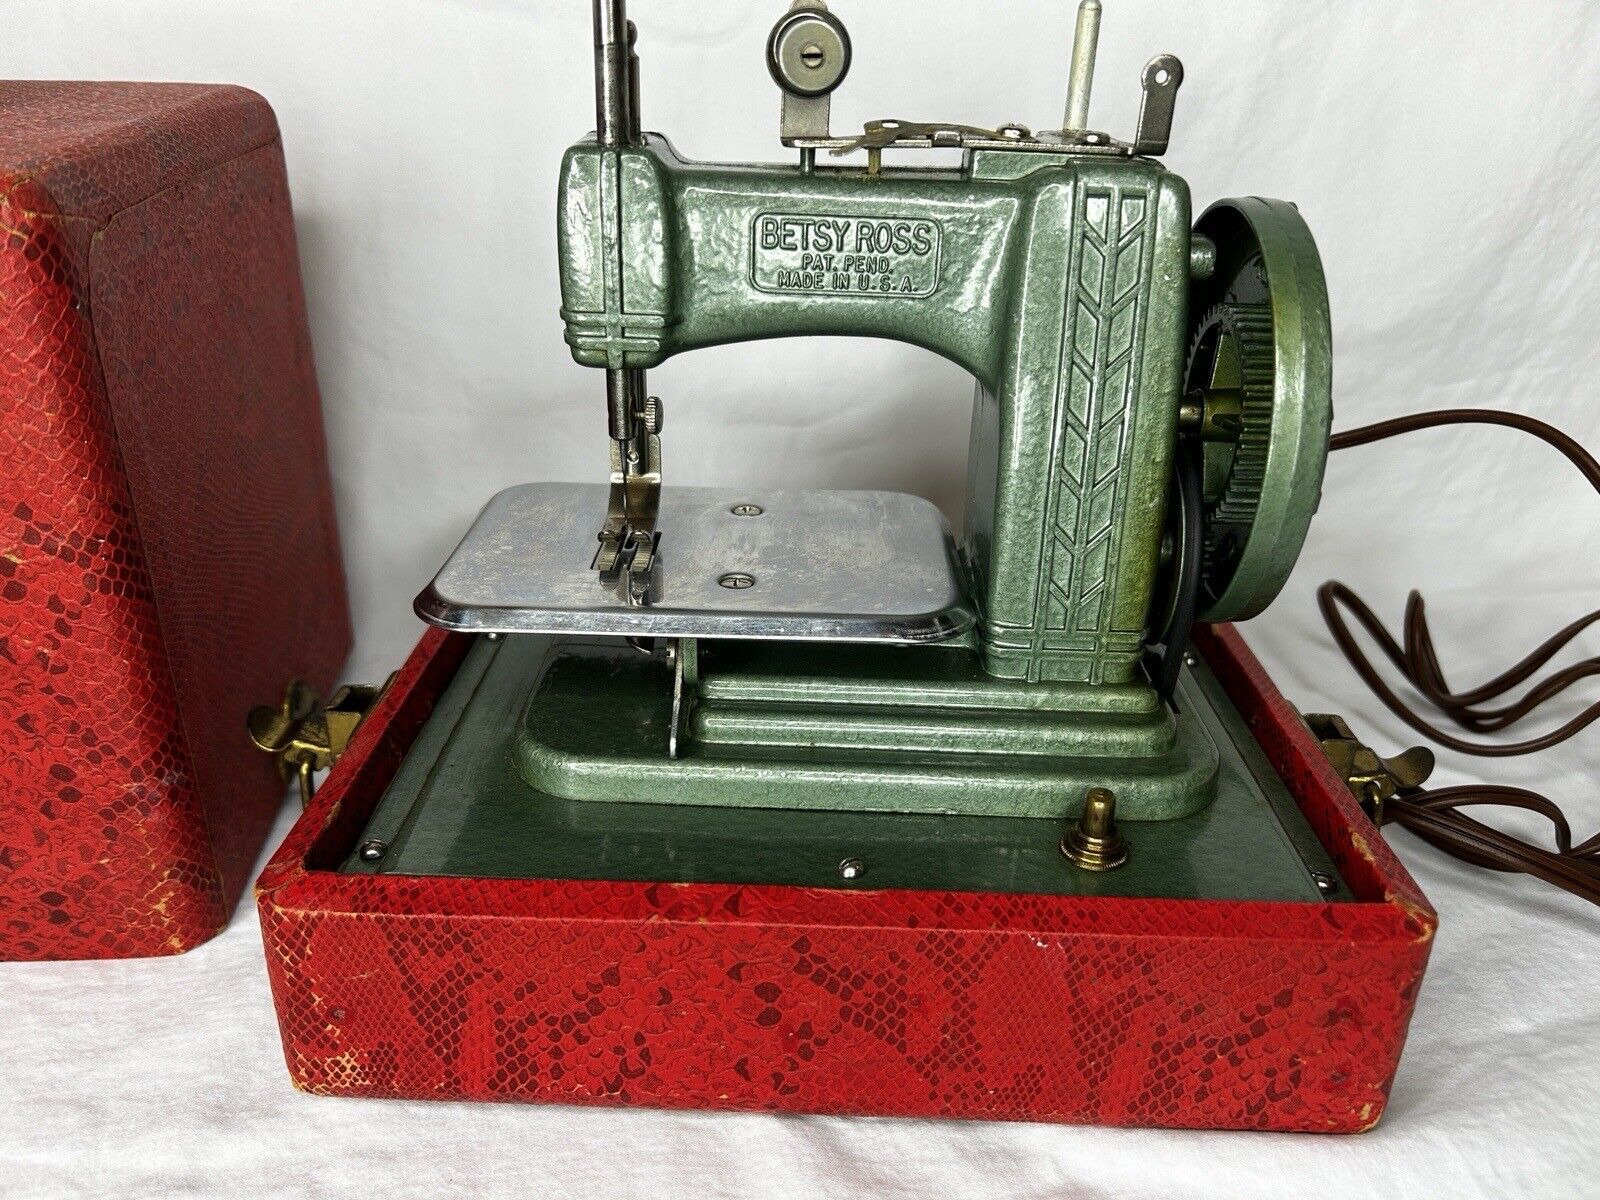 Vintage Betsy Ross Electric Child’s Sewing Machine In Case 1950s WORKS